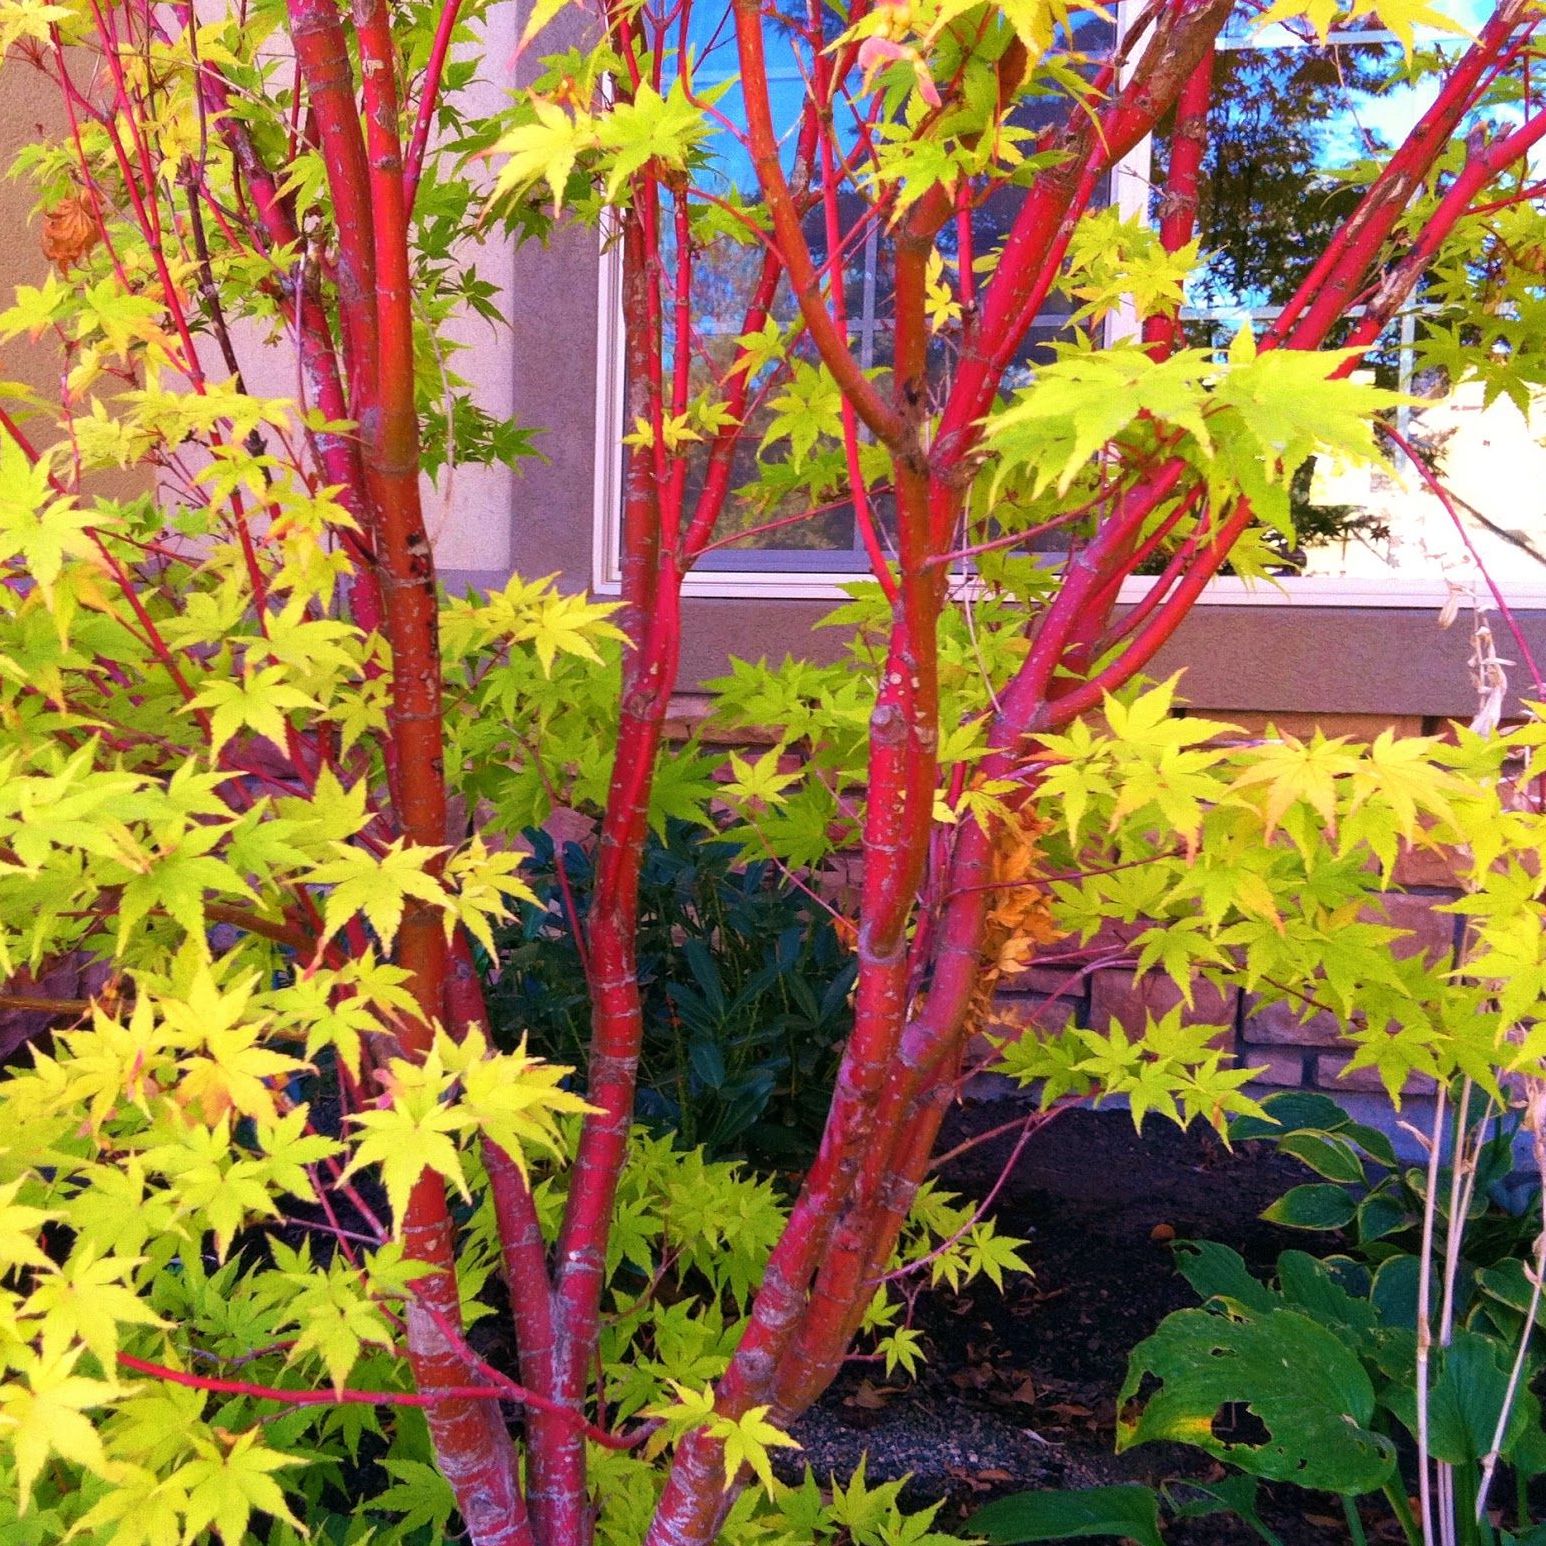 Image of Blue spruce and coral bark dogwood companion plants